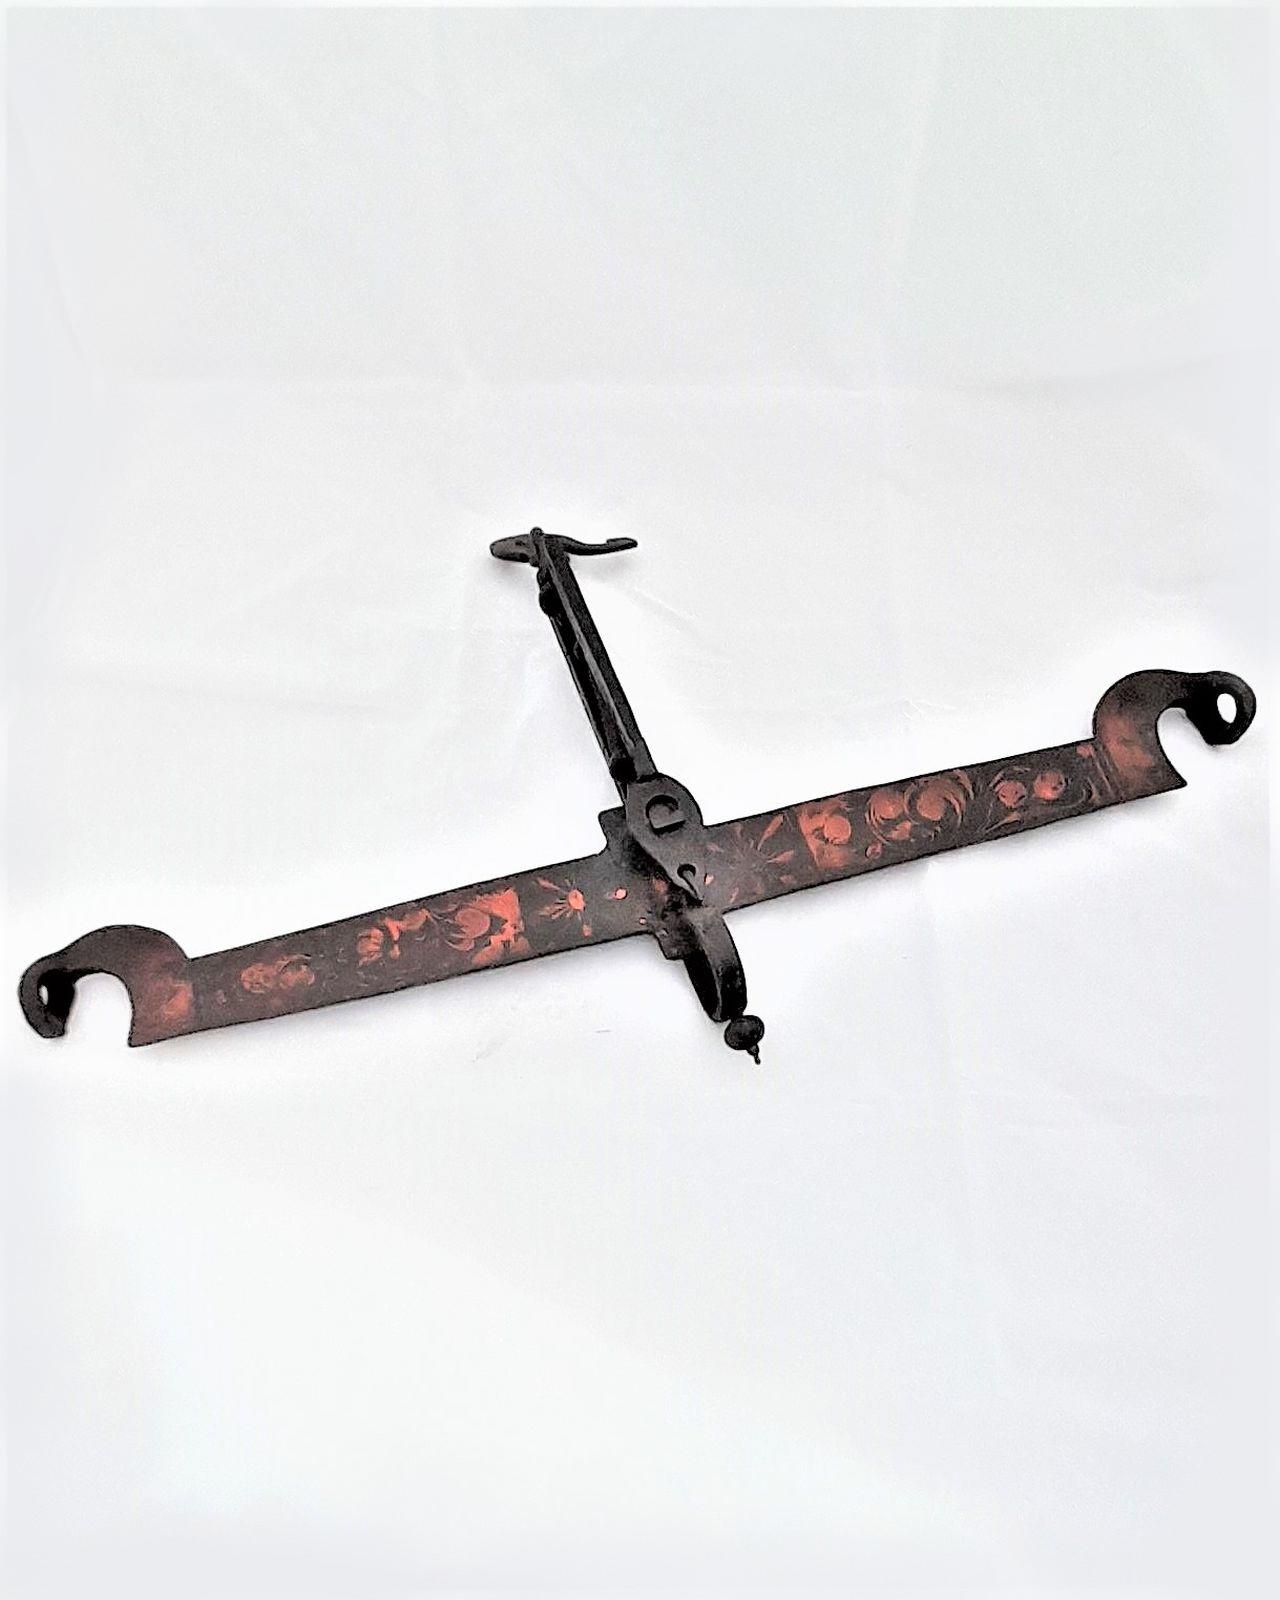 Antique Georgian floral painted wrought iron hanging balance beam scales circa 1825, 62 cm wide.